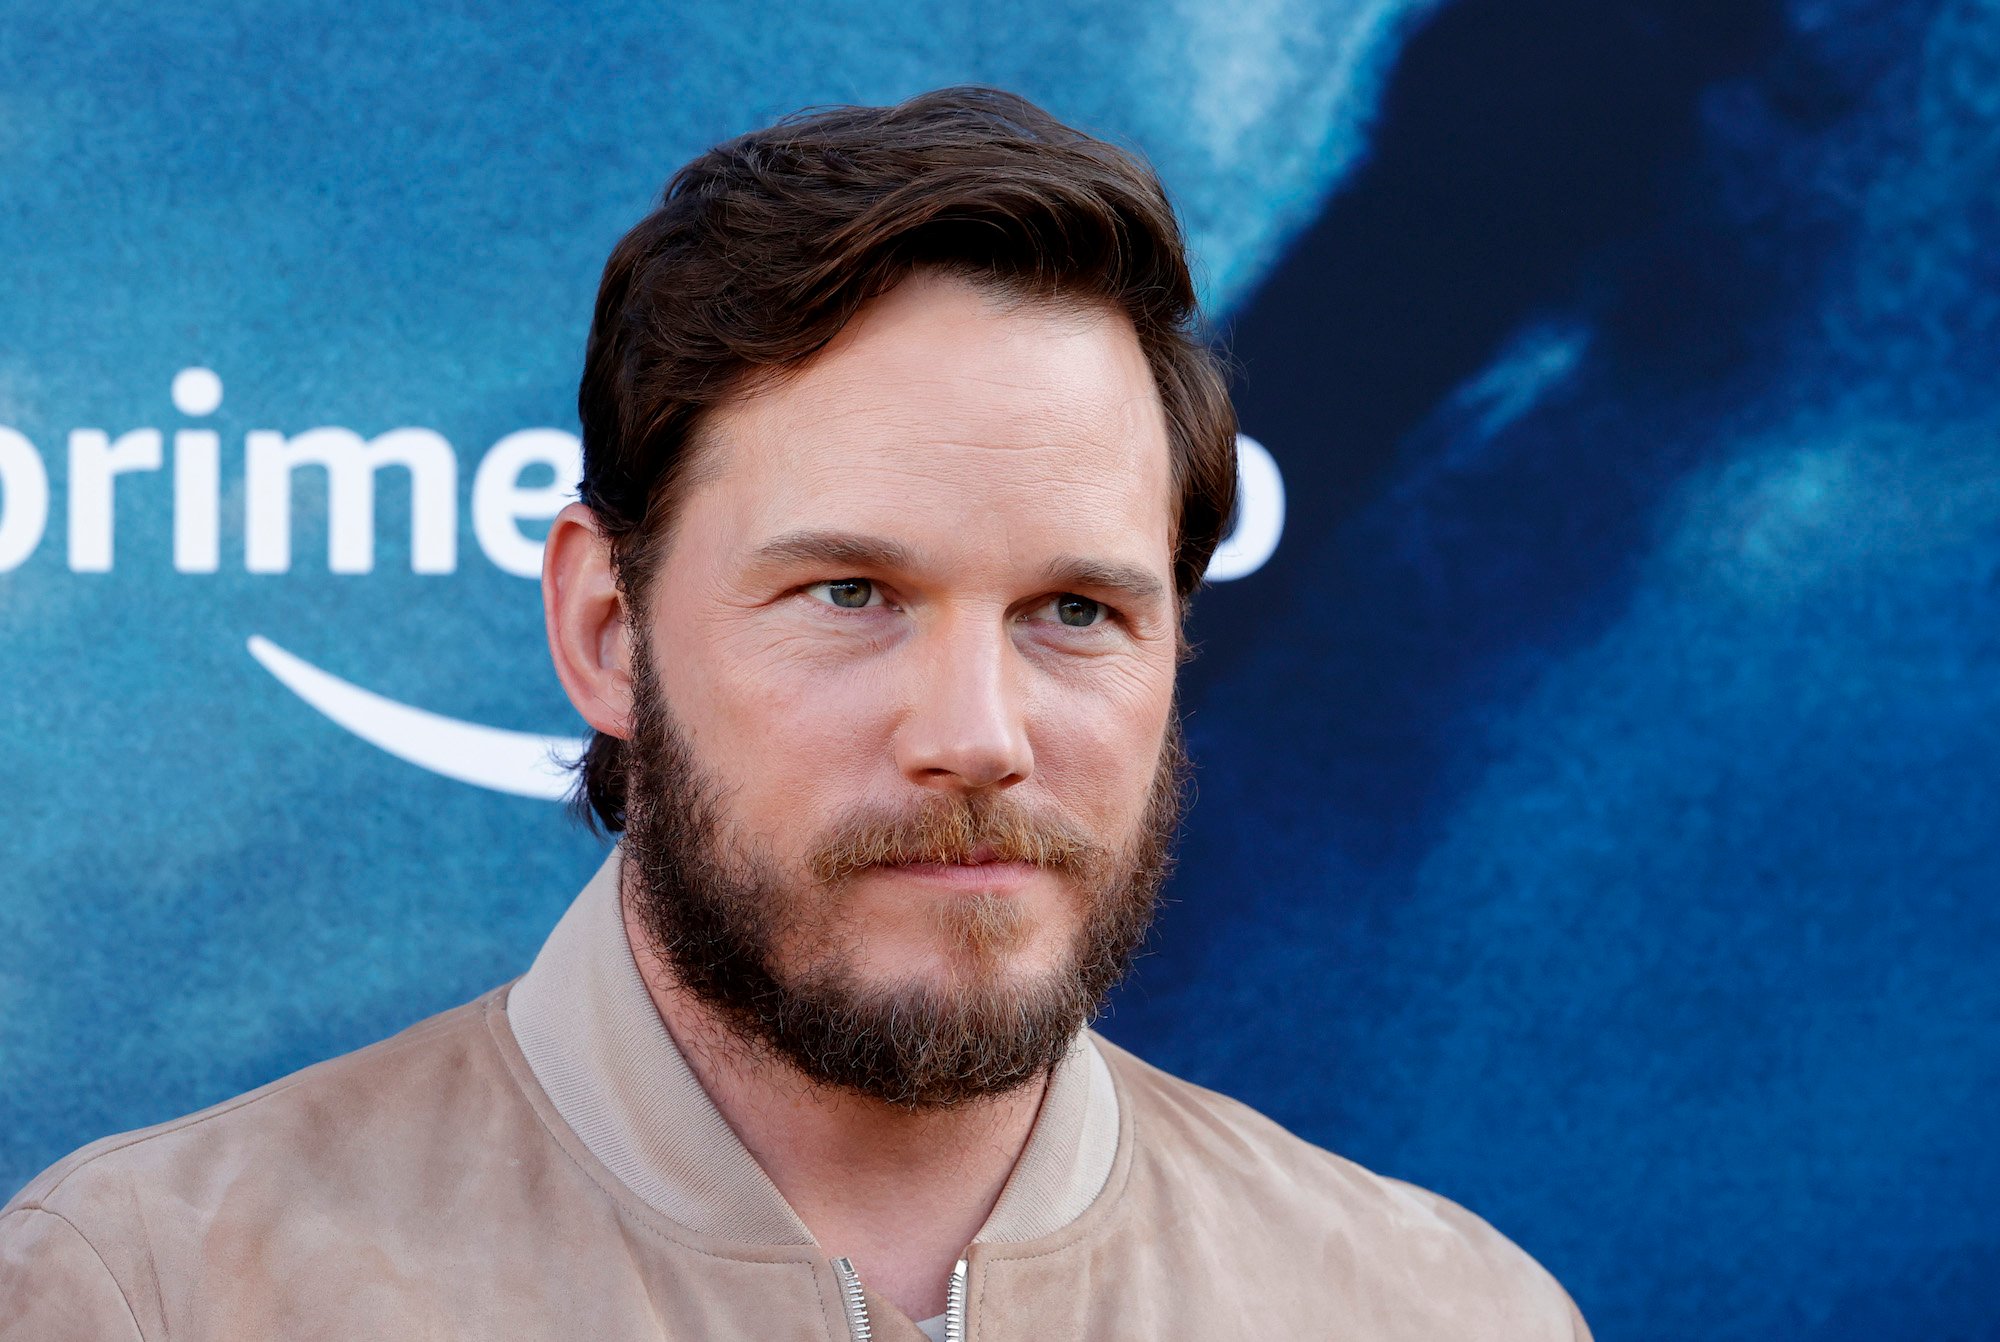 Chris Pratt wearing a tan jacket in front of a blue background at the 'Tomorrow War' premiere